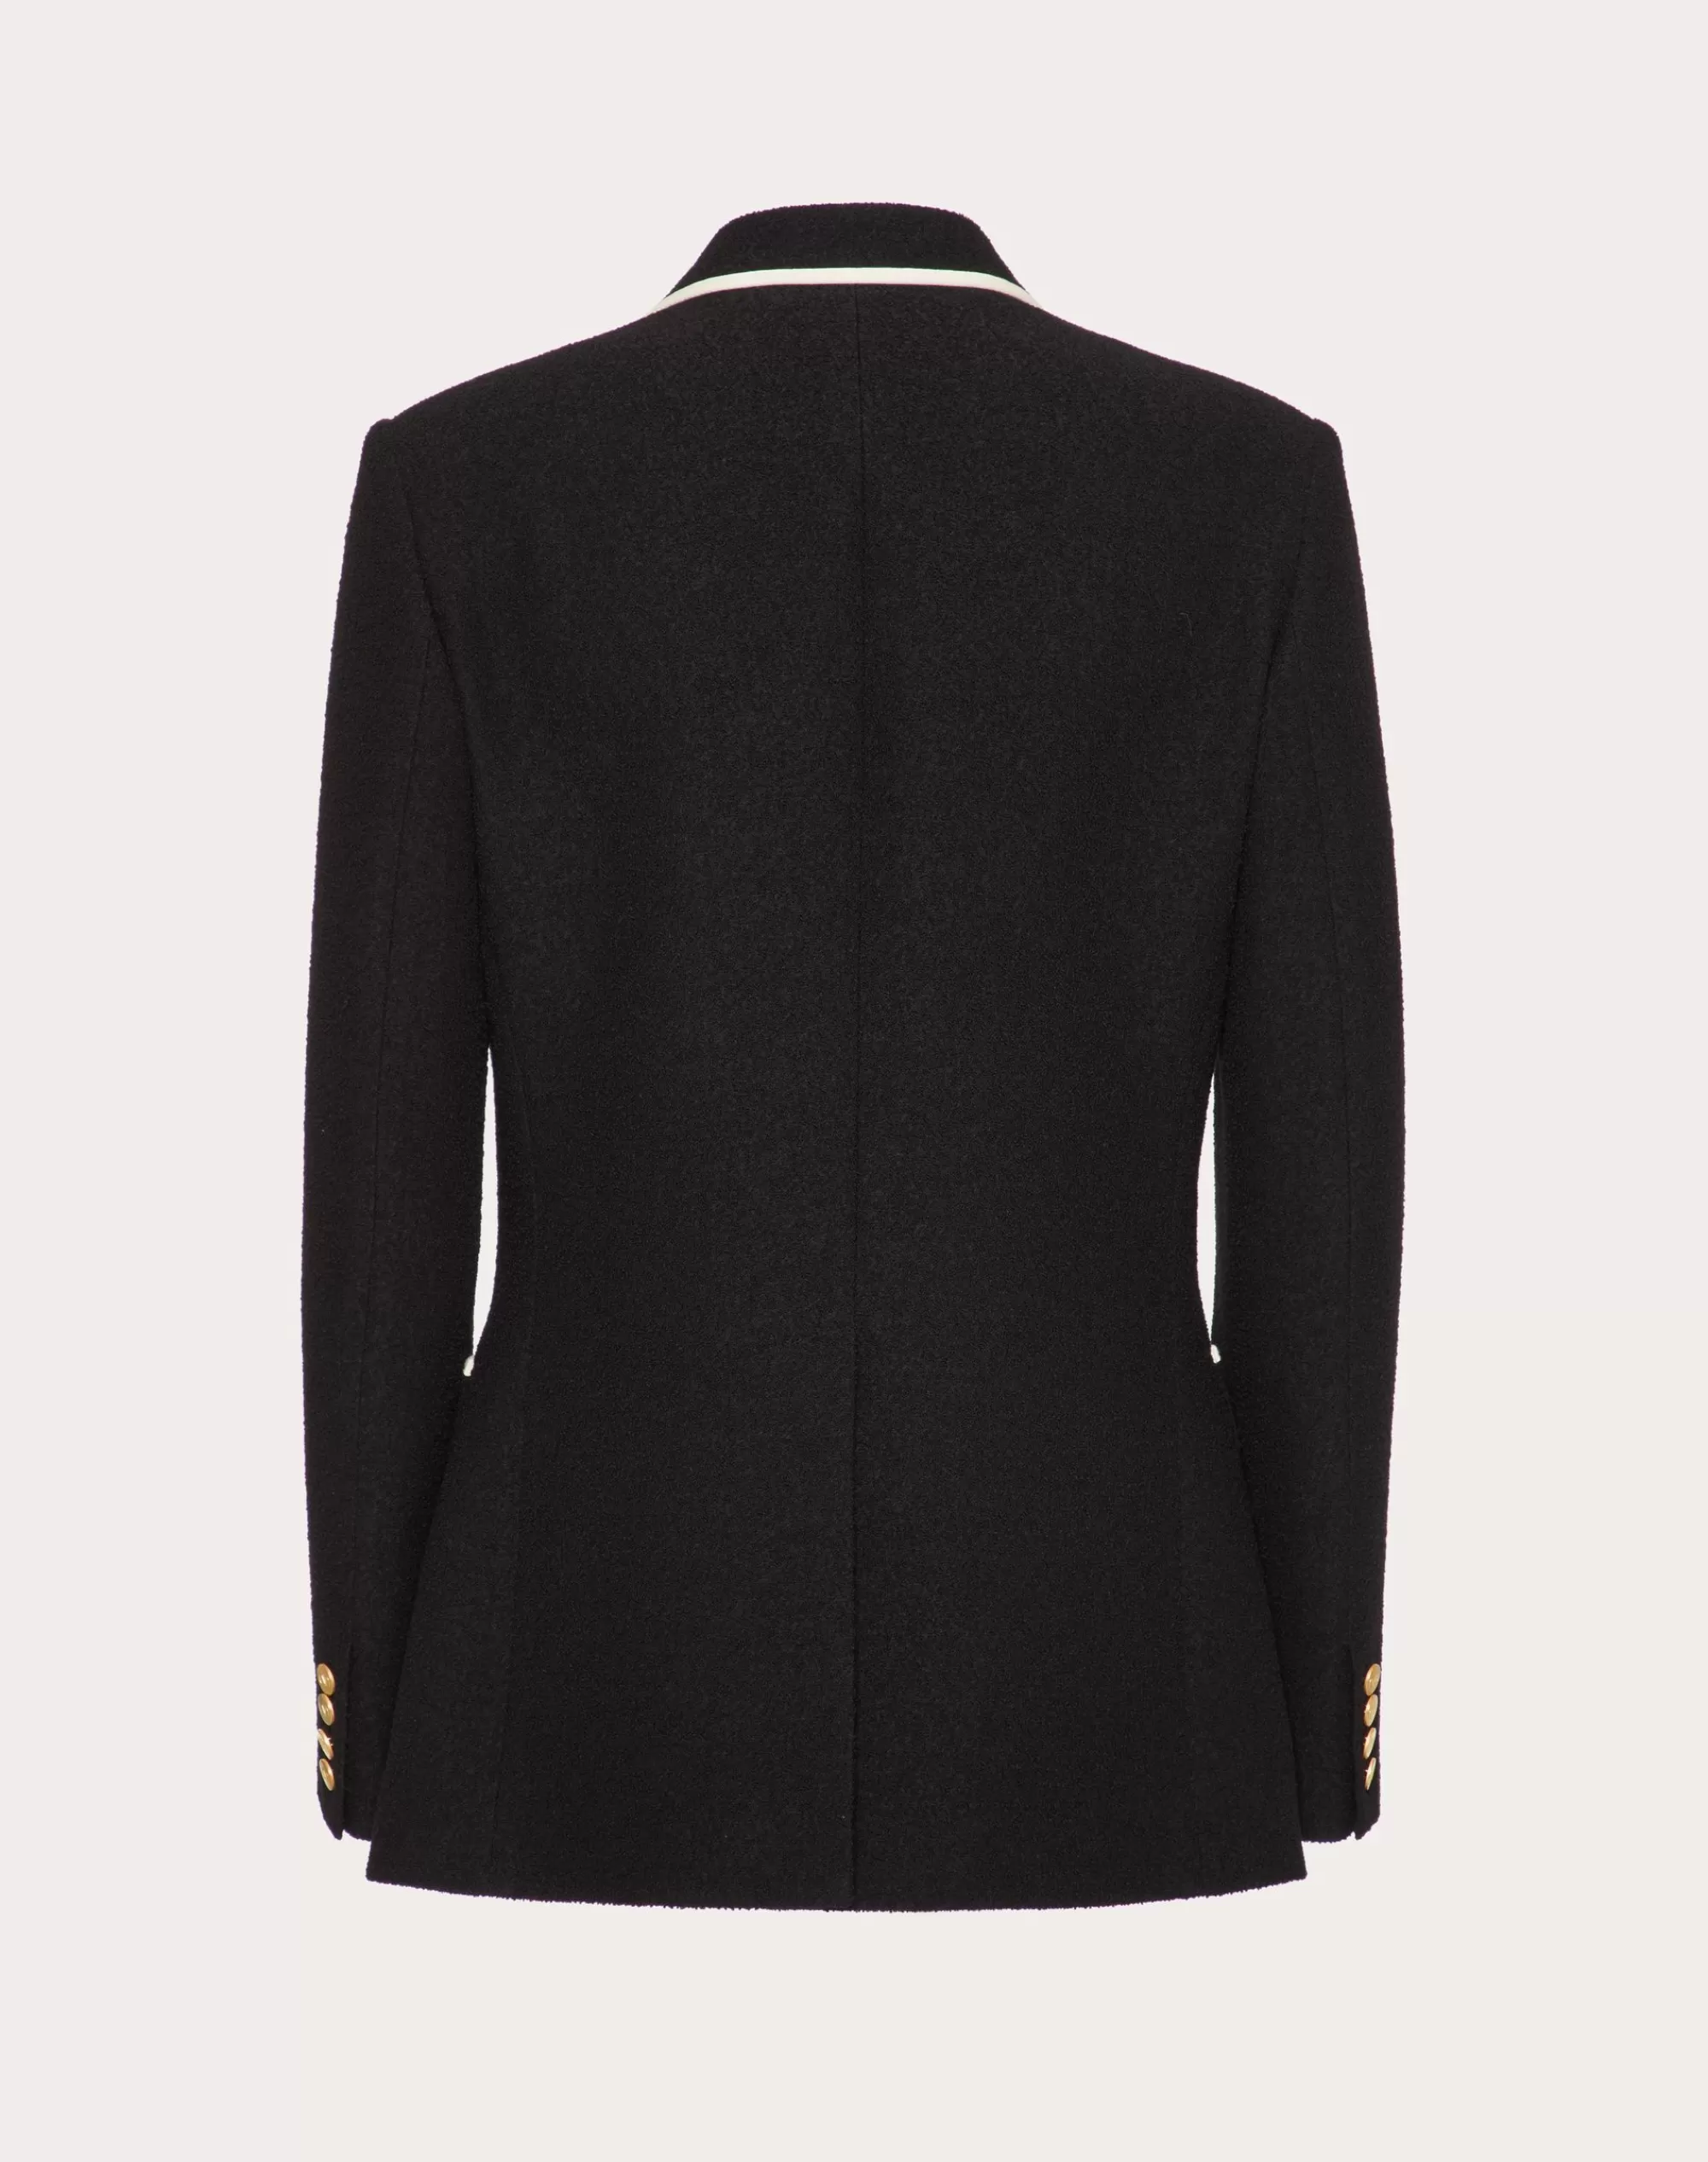 Valentino DOUBLE-BREASTED BOUCLÉ WOOL JACKET WITH VLOGO SIGNATURE EMBROIDERY Black Best